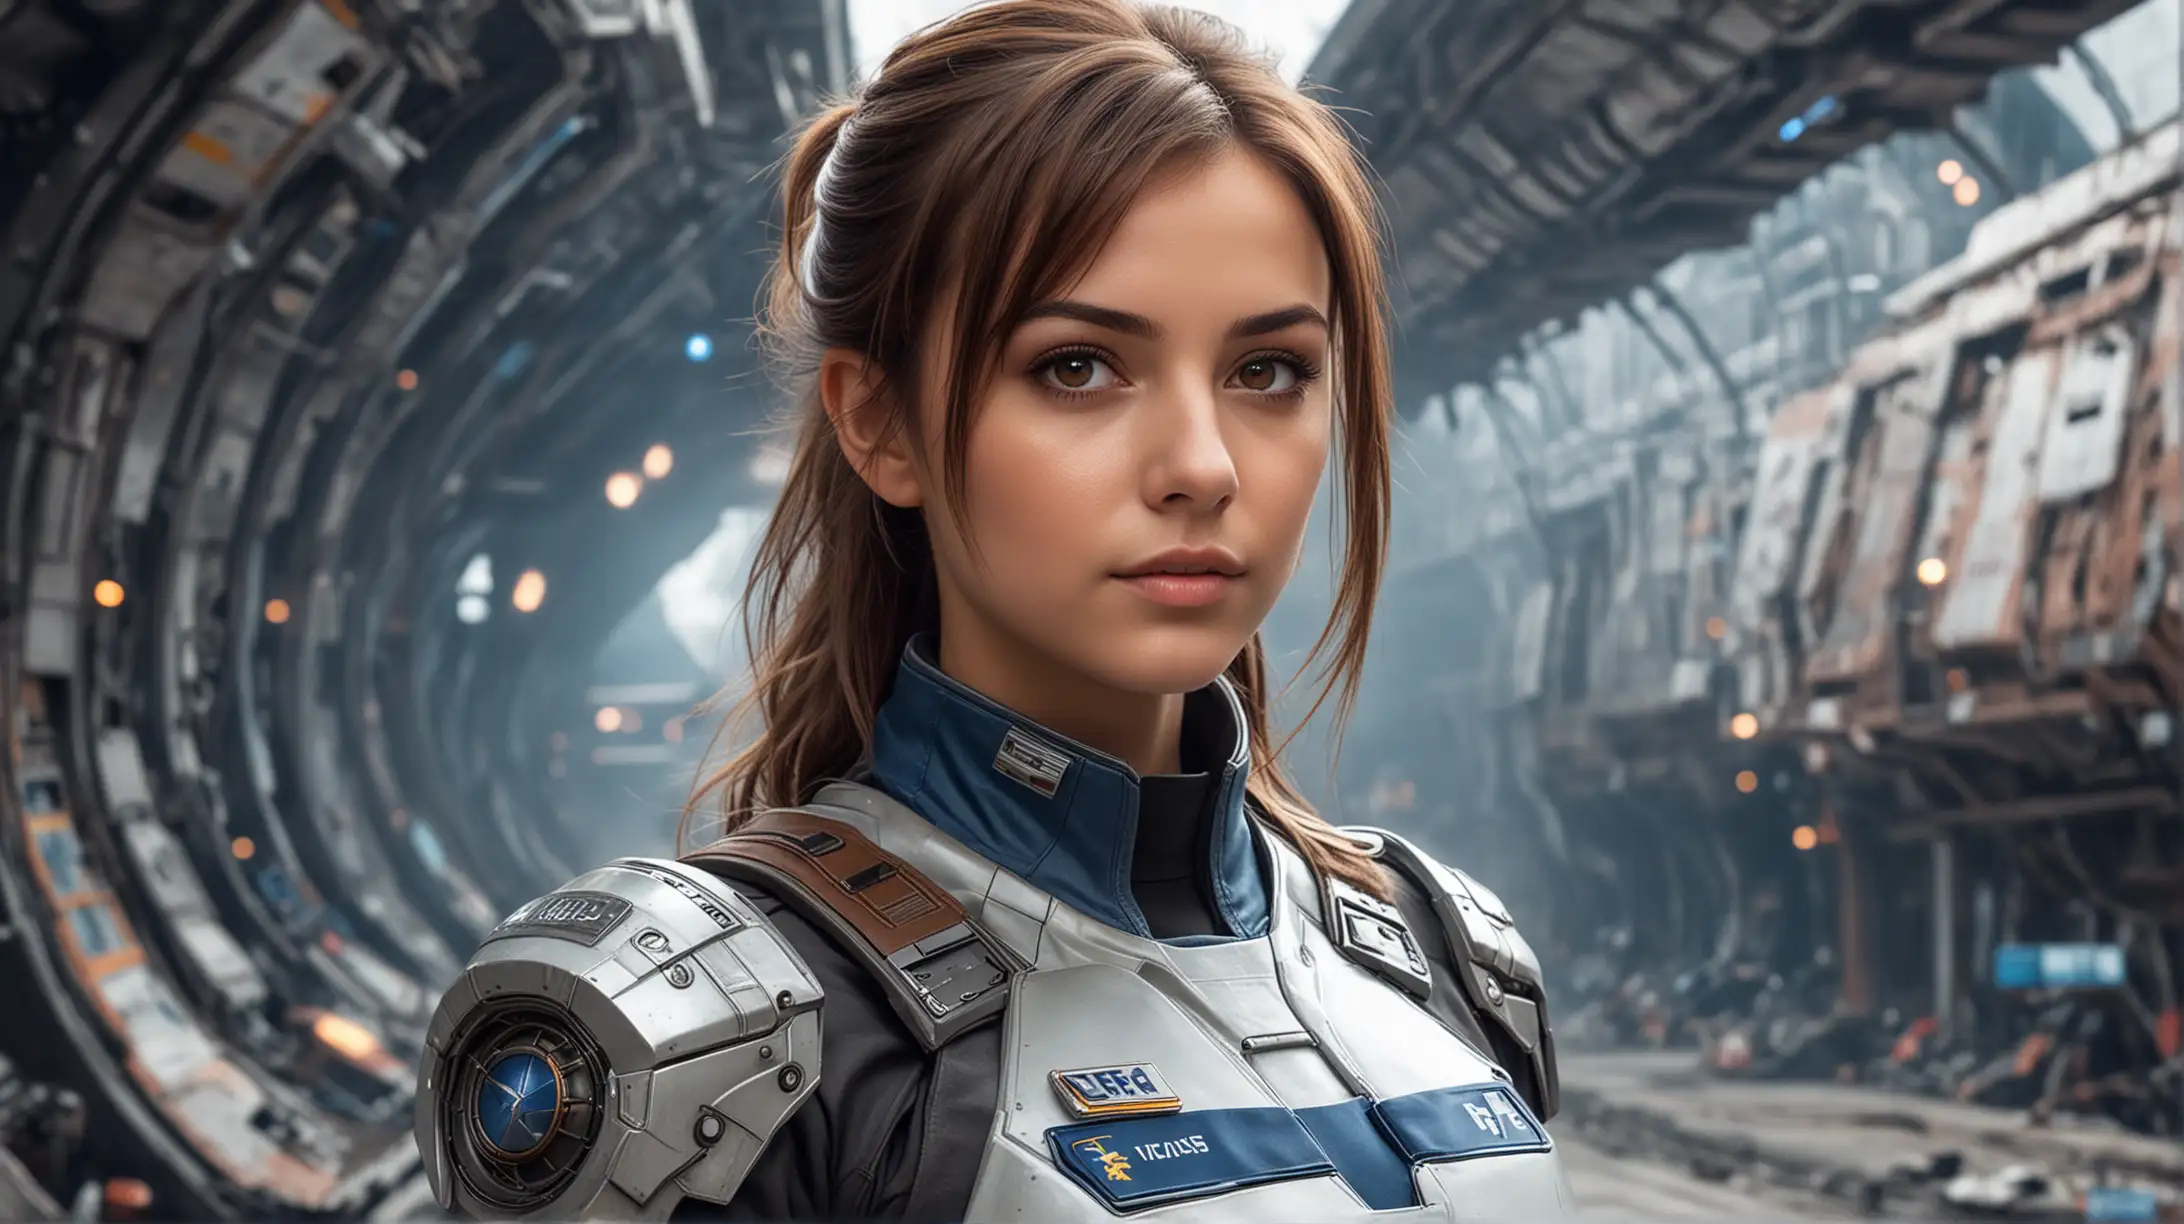 Brown haired European girl, in a scifi uniform, the uniform should be grey and blue, she looks very beautiful, brown eyes. Scifi city background.